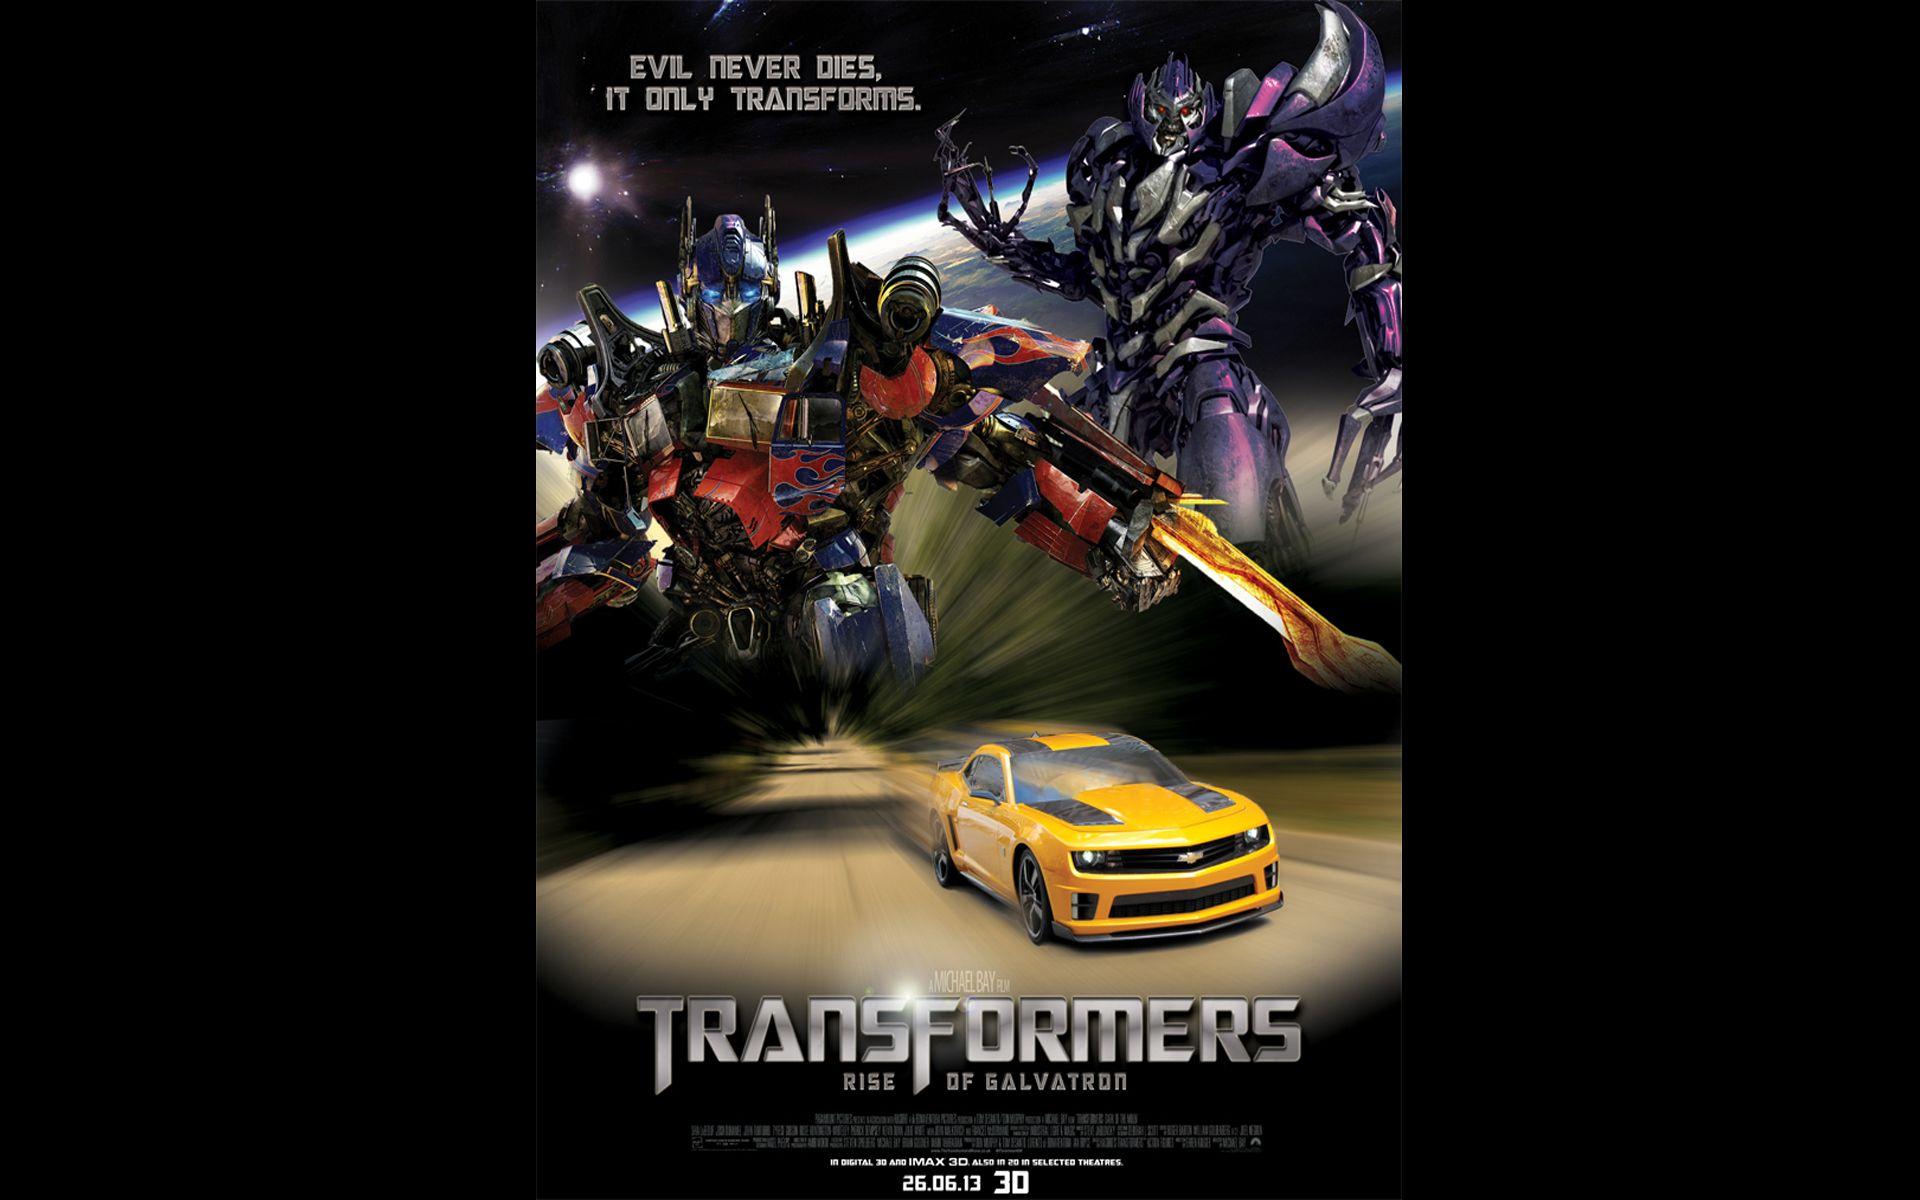 transformers 4 rise of galvatron cast